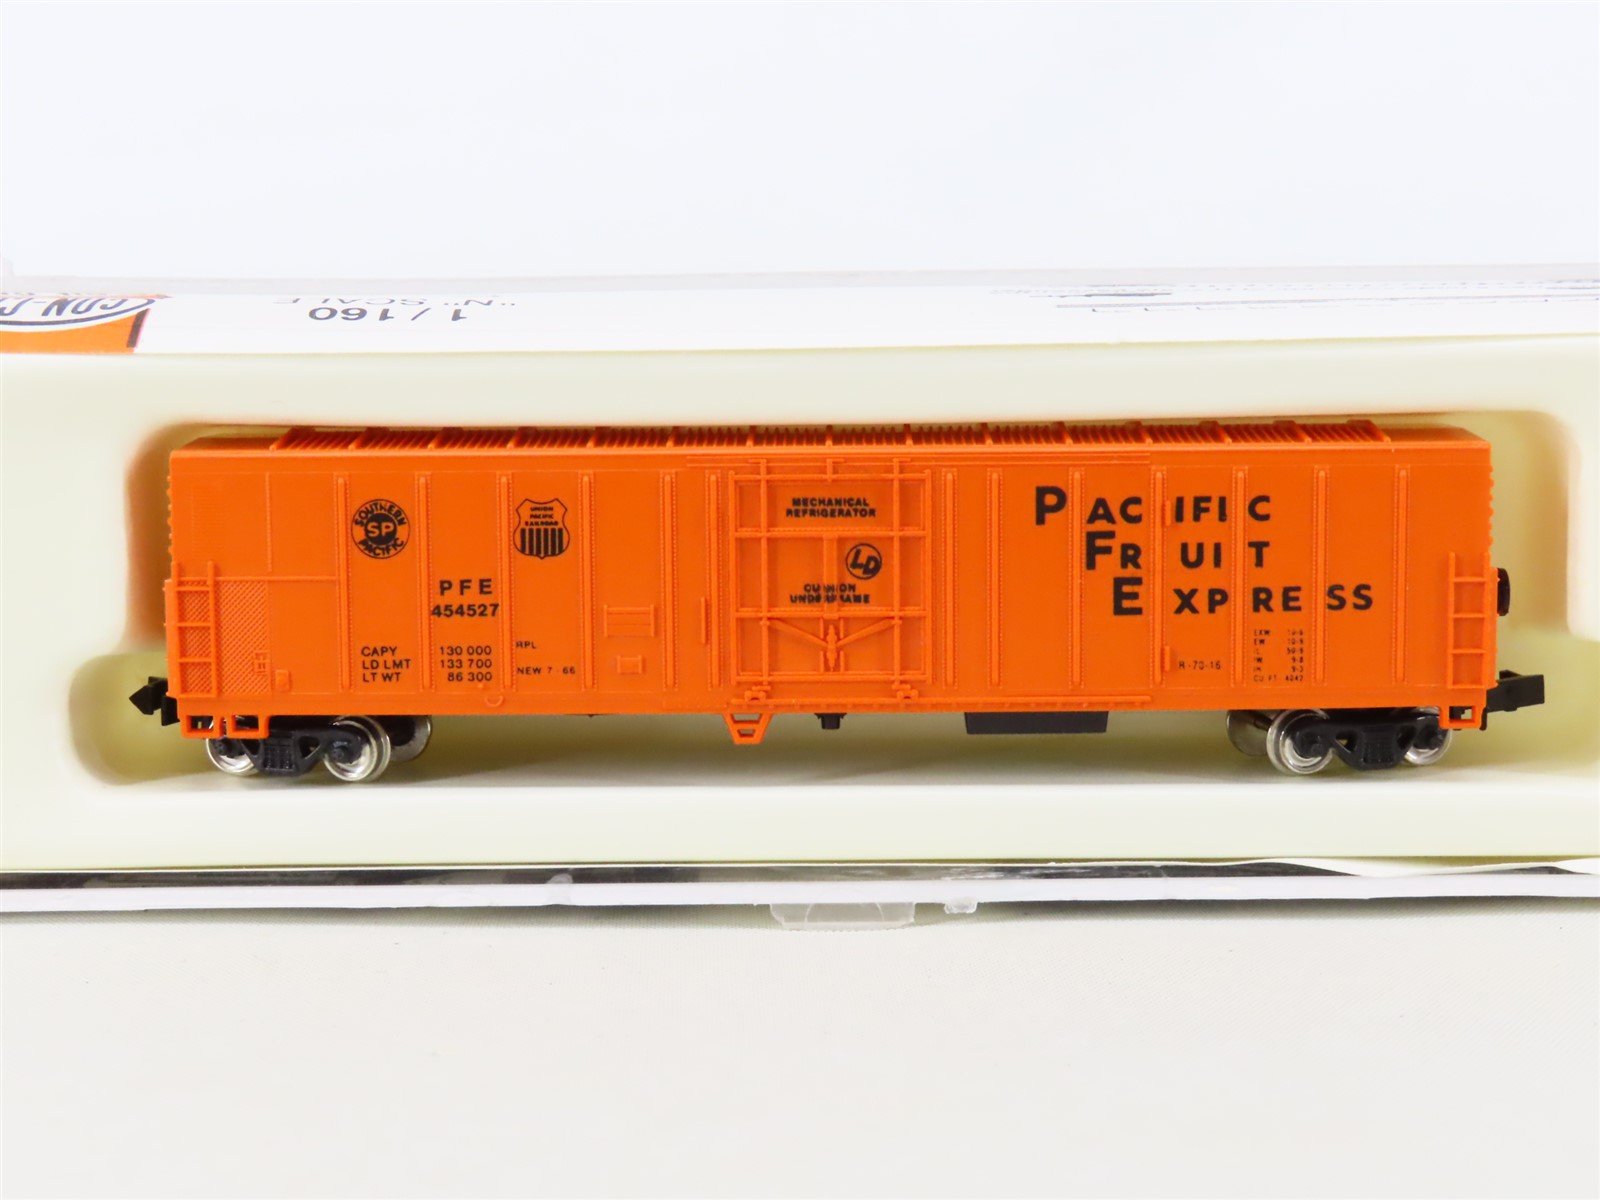 N Con-Cor #001-148201-9 SP UP PFE Pacific Fruit Express 57' Mech. Reefer #454527